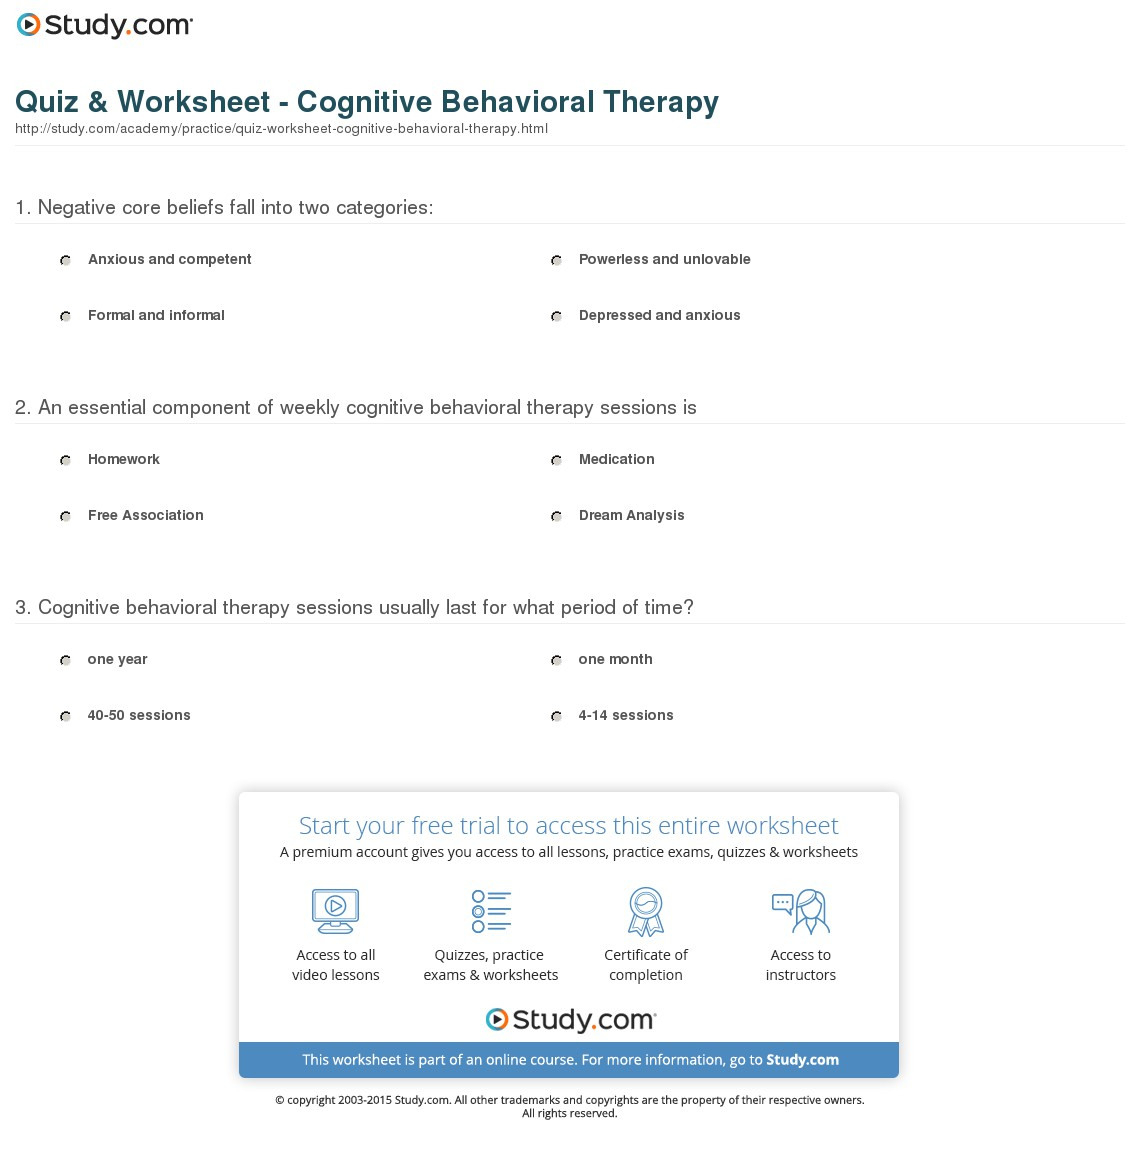 Quiz  Worksheet  Cognitive Behavioral Therapy  Study